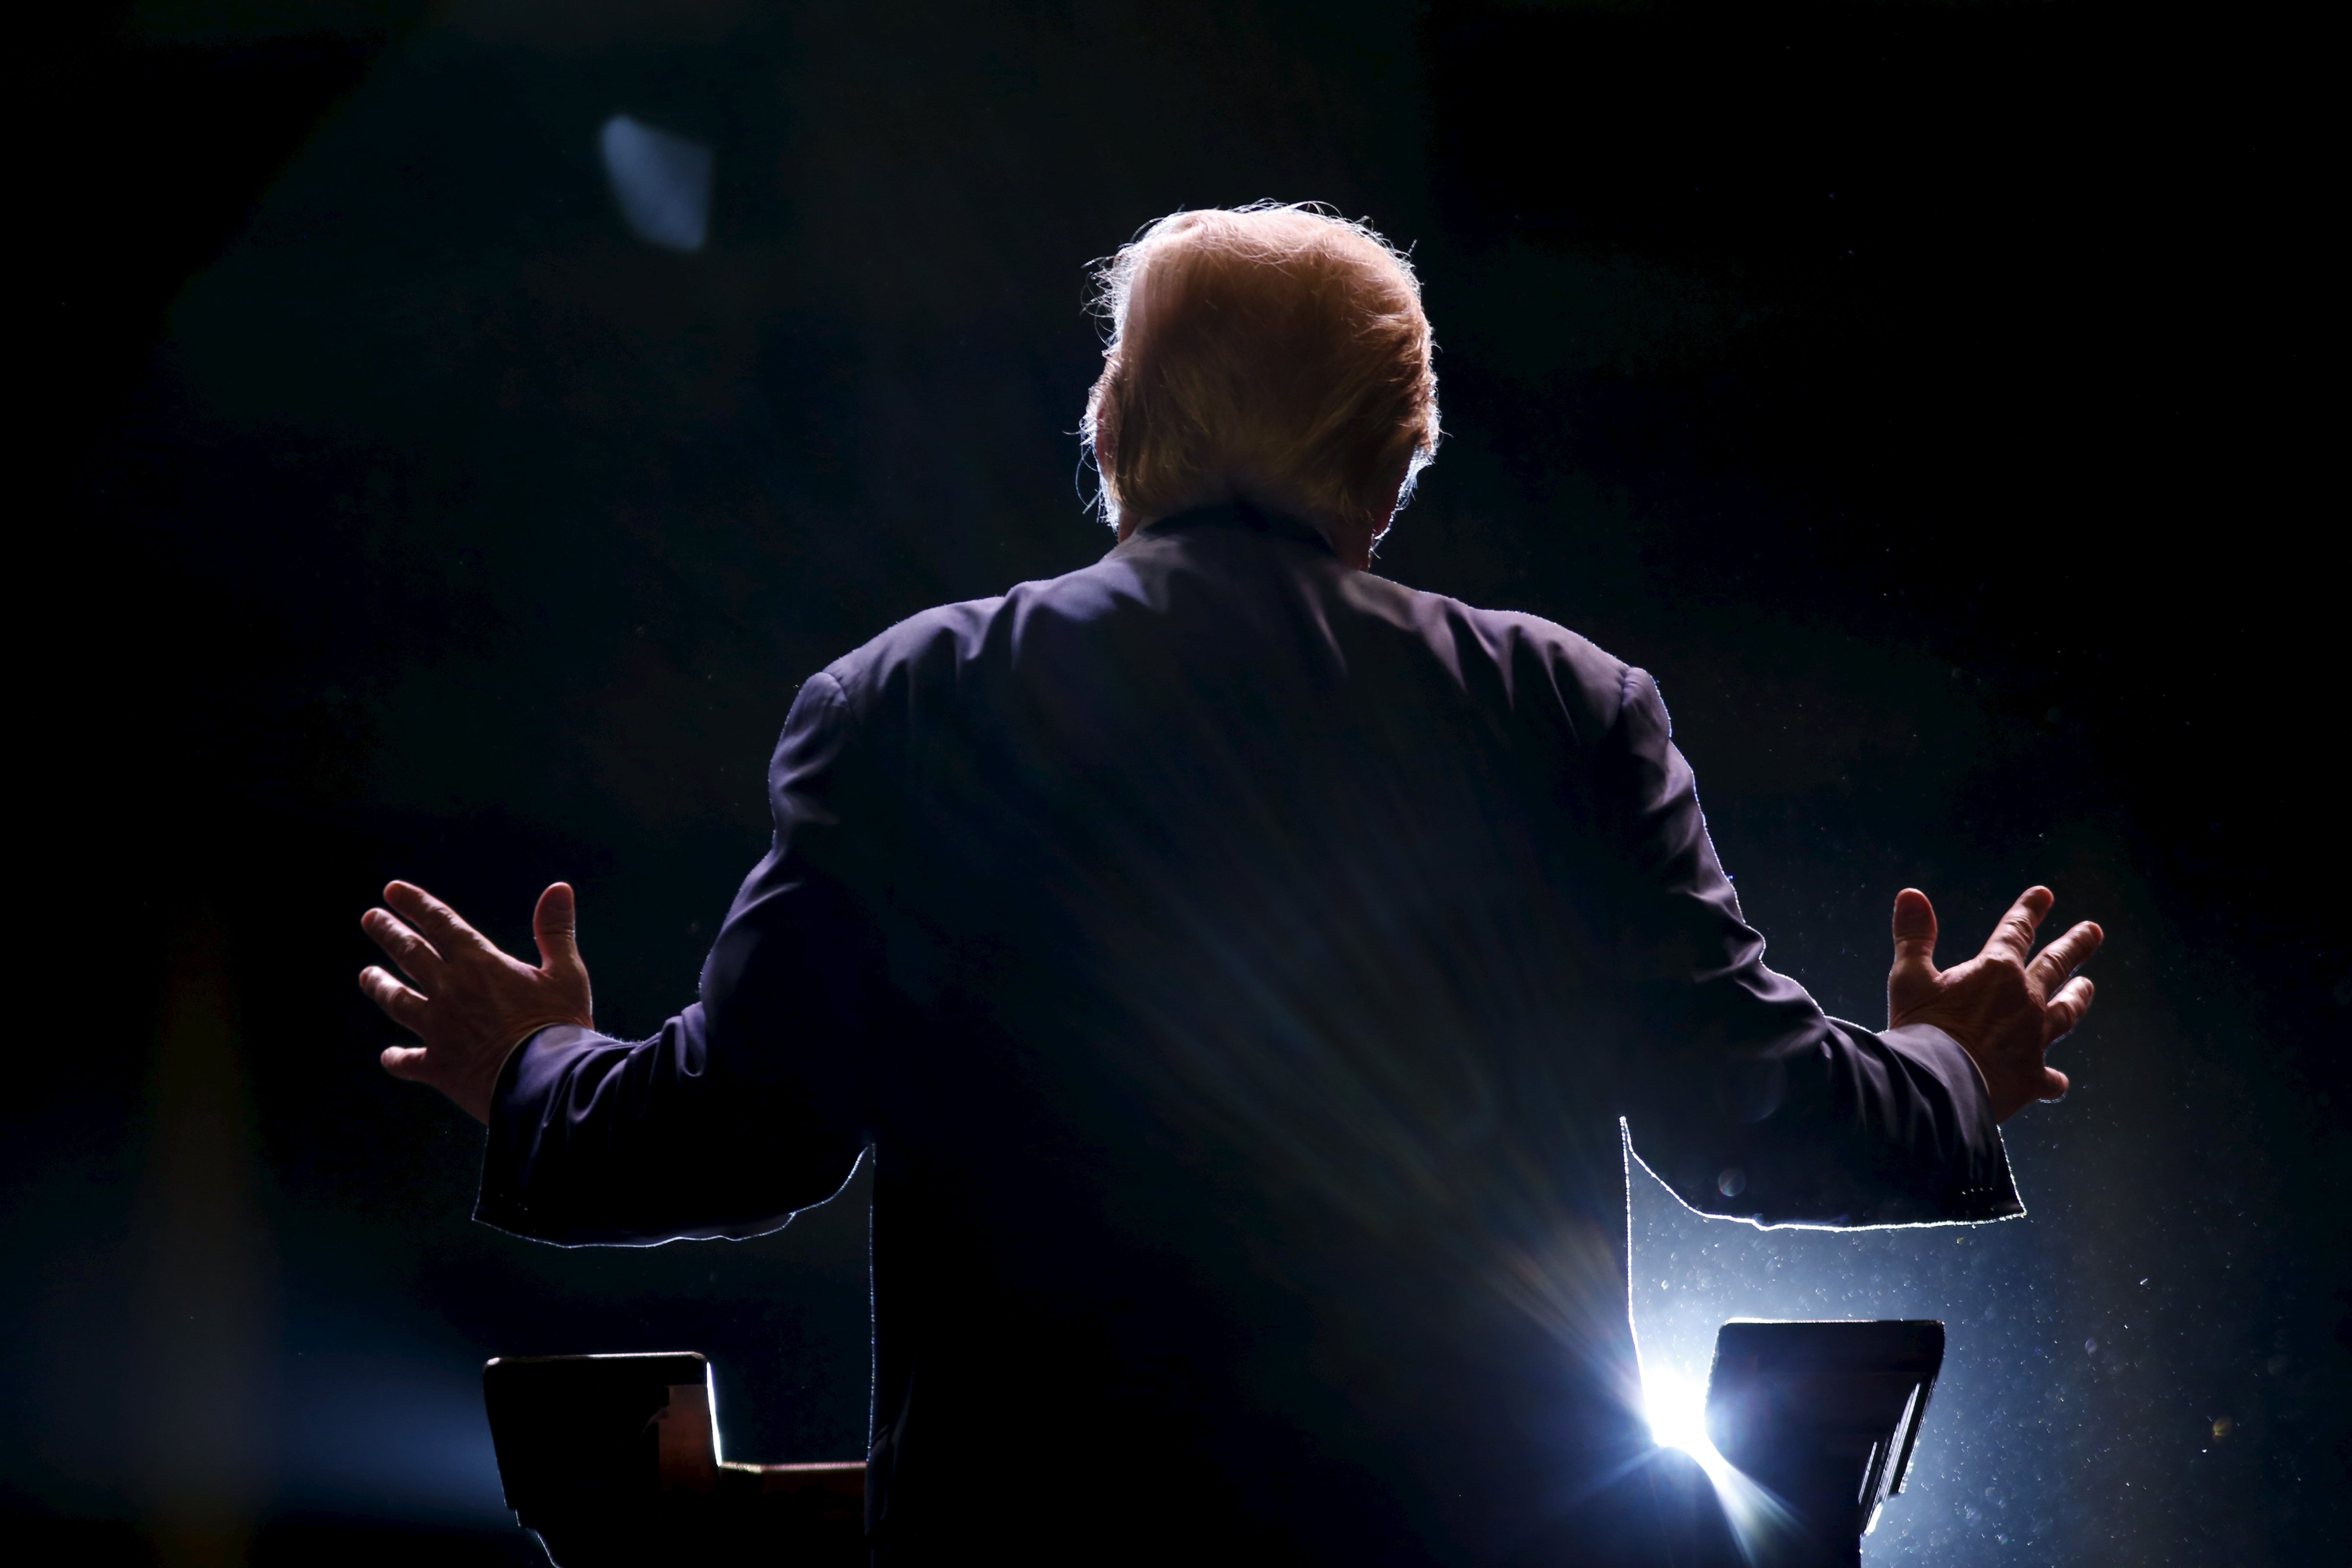 Donald Trump addresses a Trump for President campaign rally in Macon, Georgia Nov. 30, 2015. (Christopher Aluka Berry—Reuters)